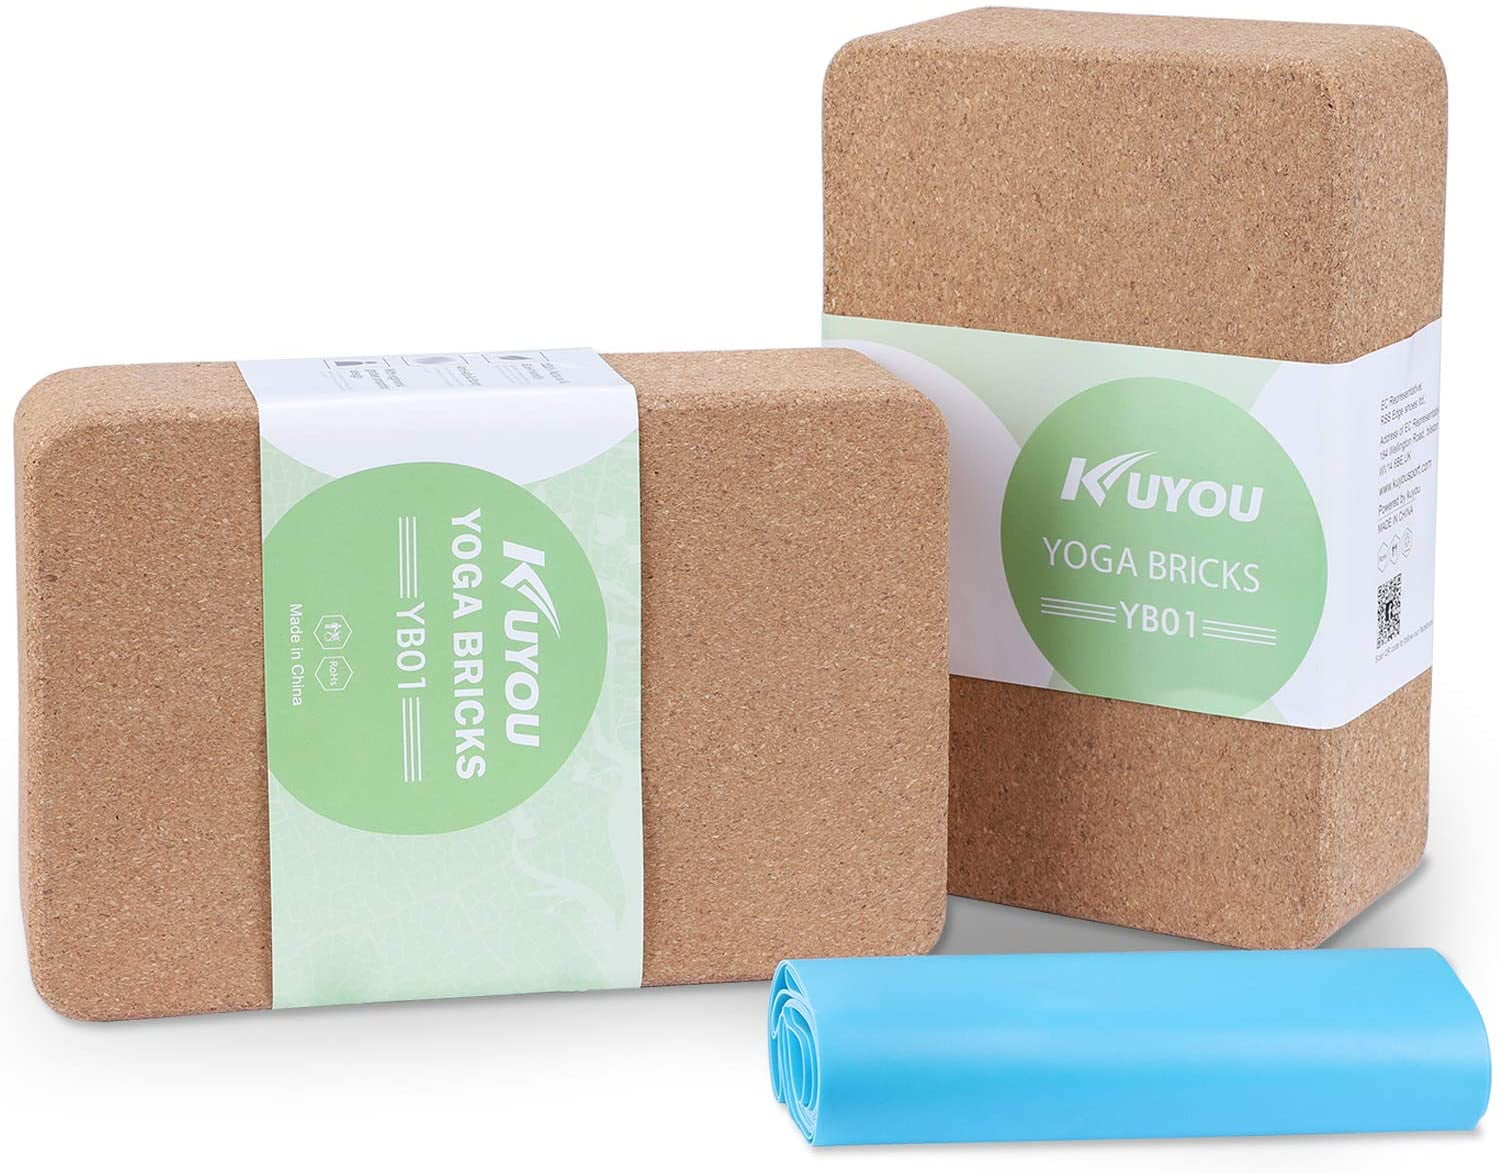 Entirely Natural Cork Yoga Block Hygienic and Eco-Friendly 